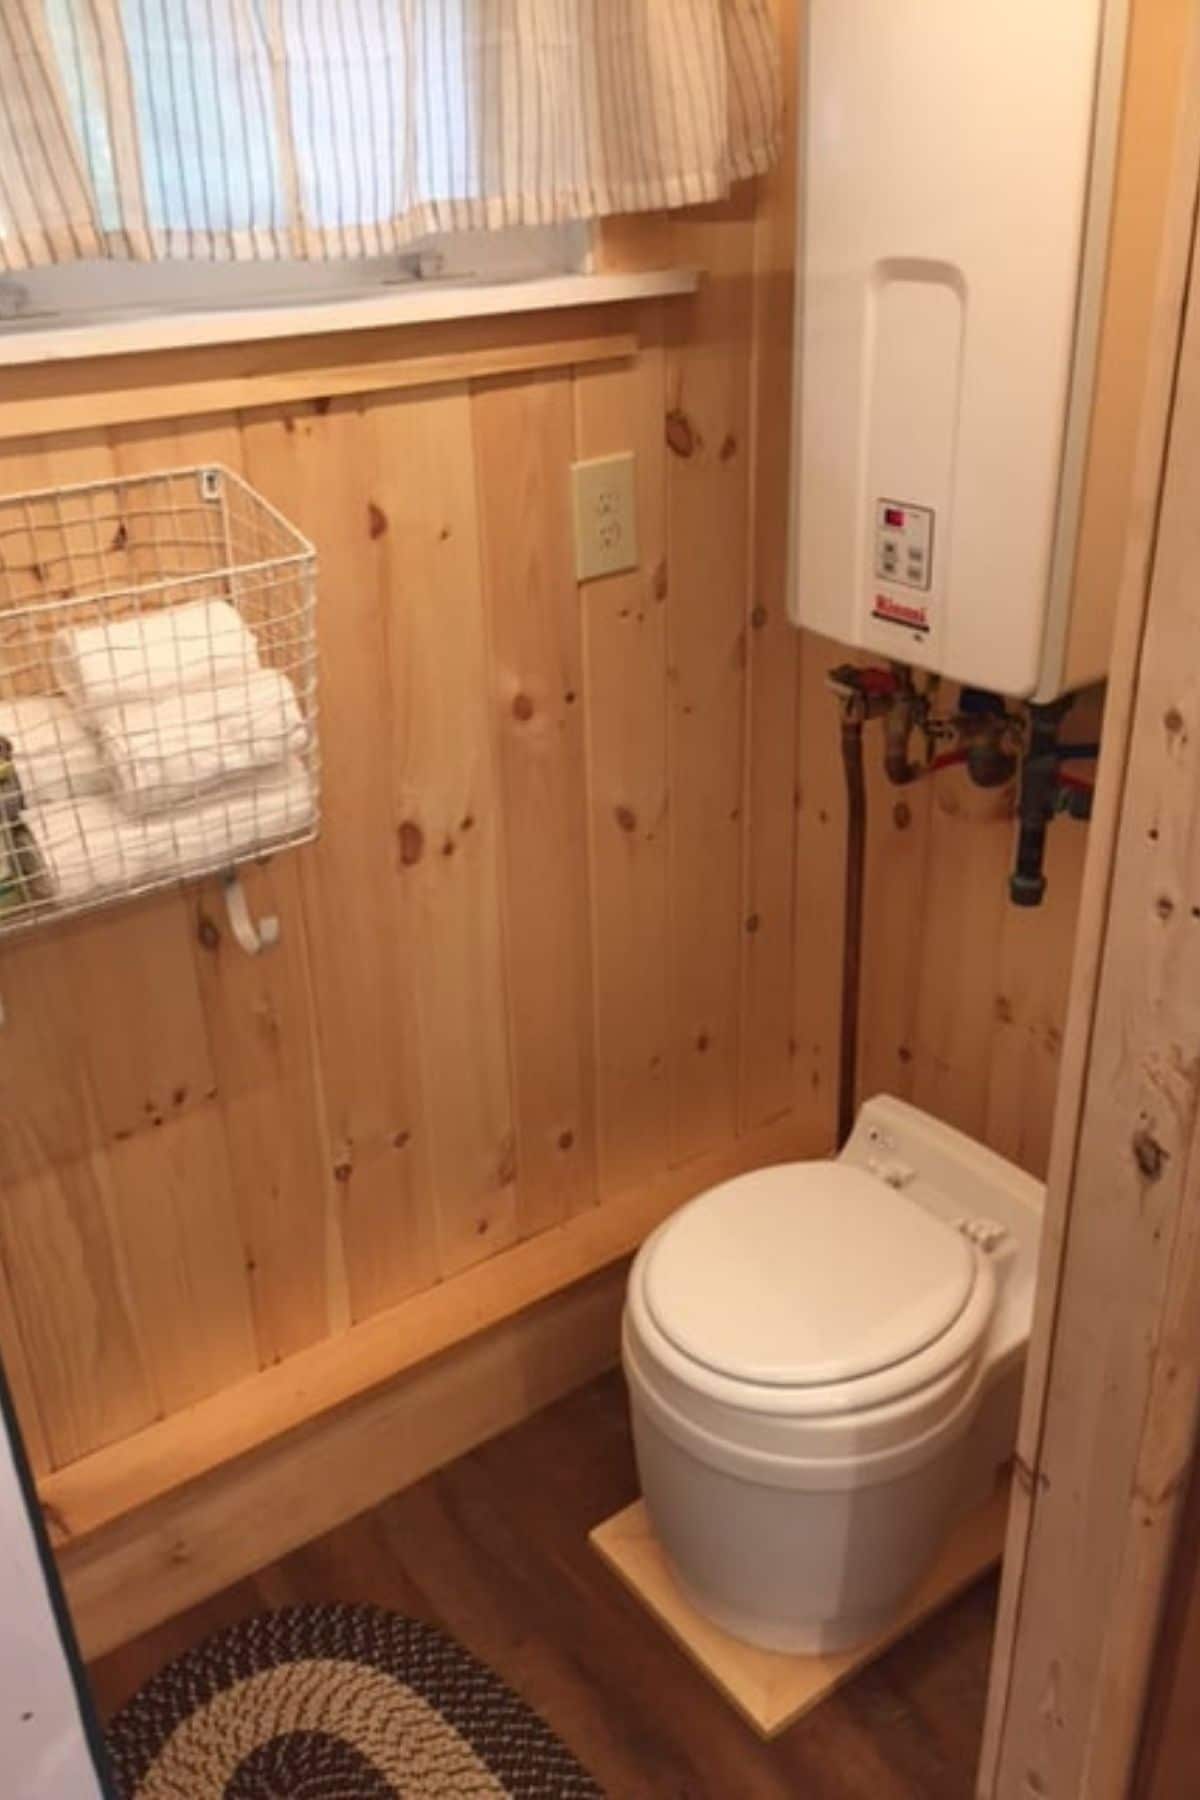 small white toilet against light wood walls in bathroom